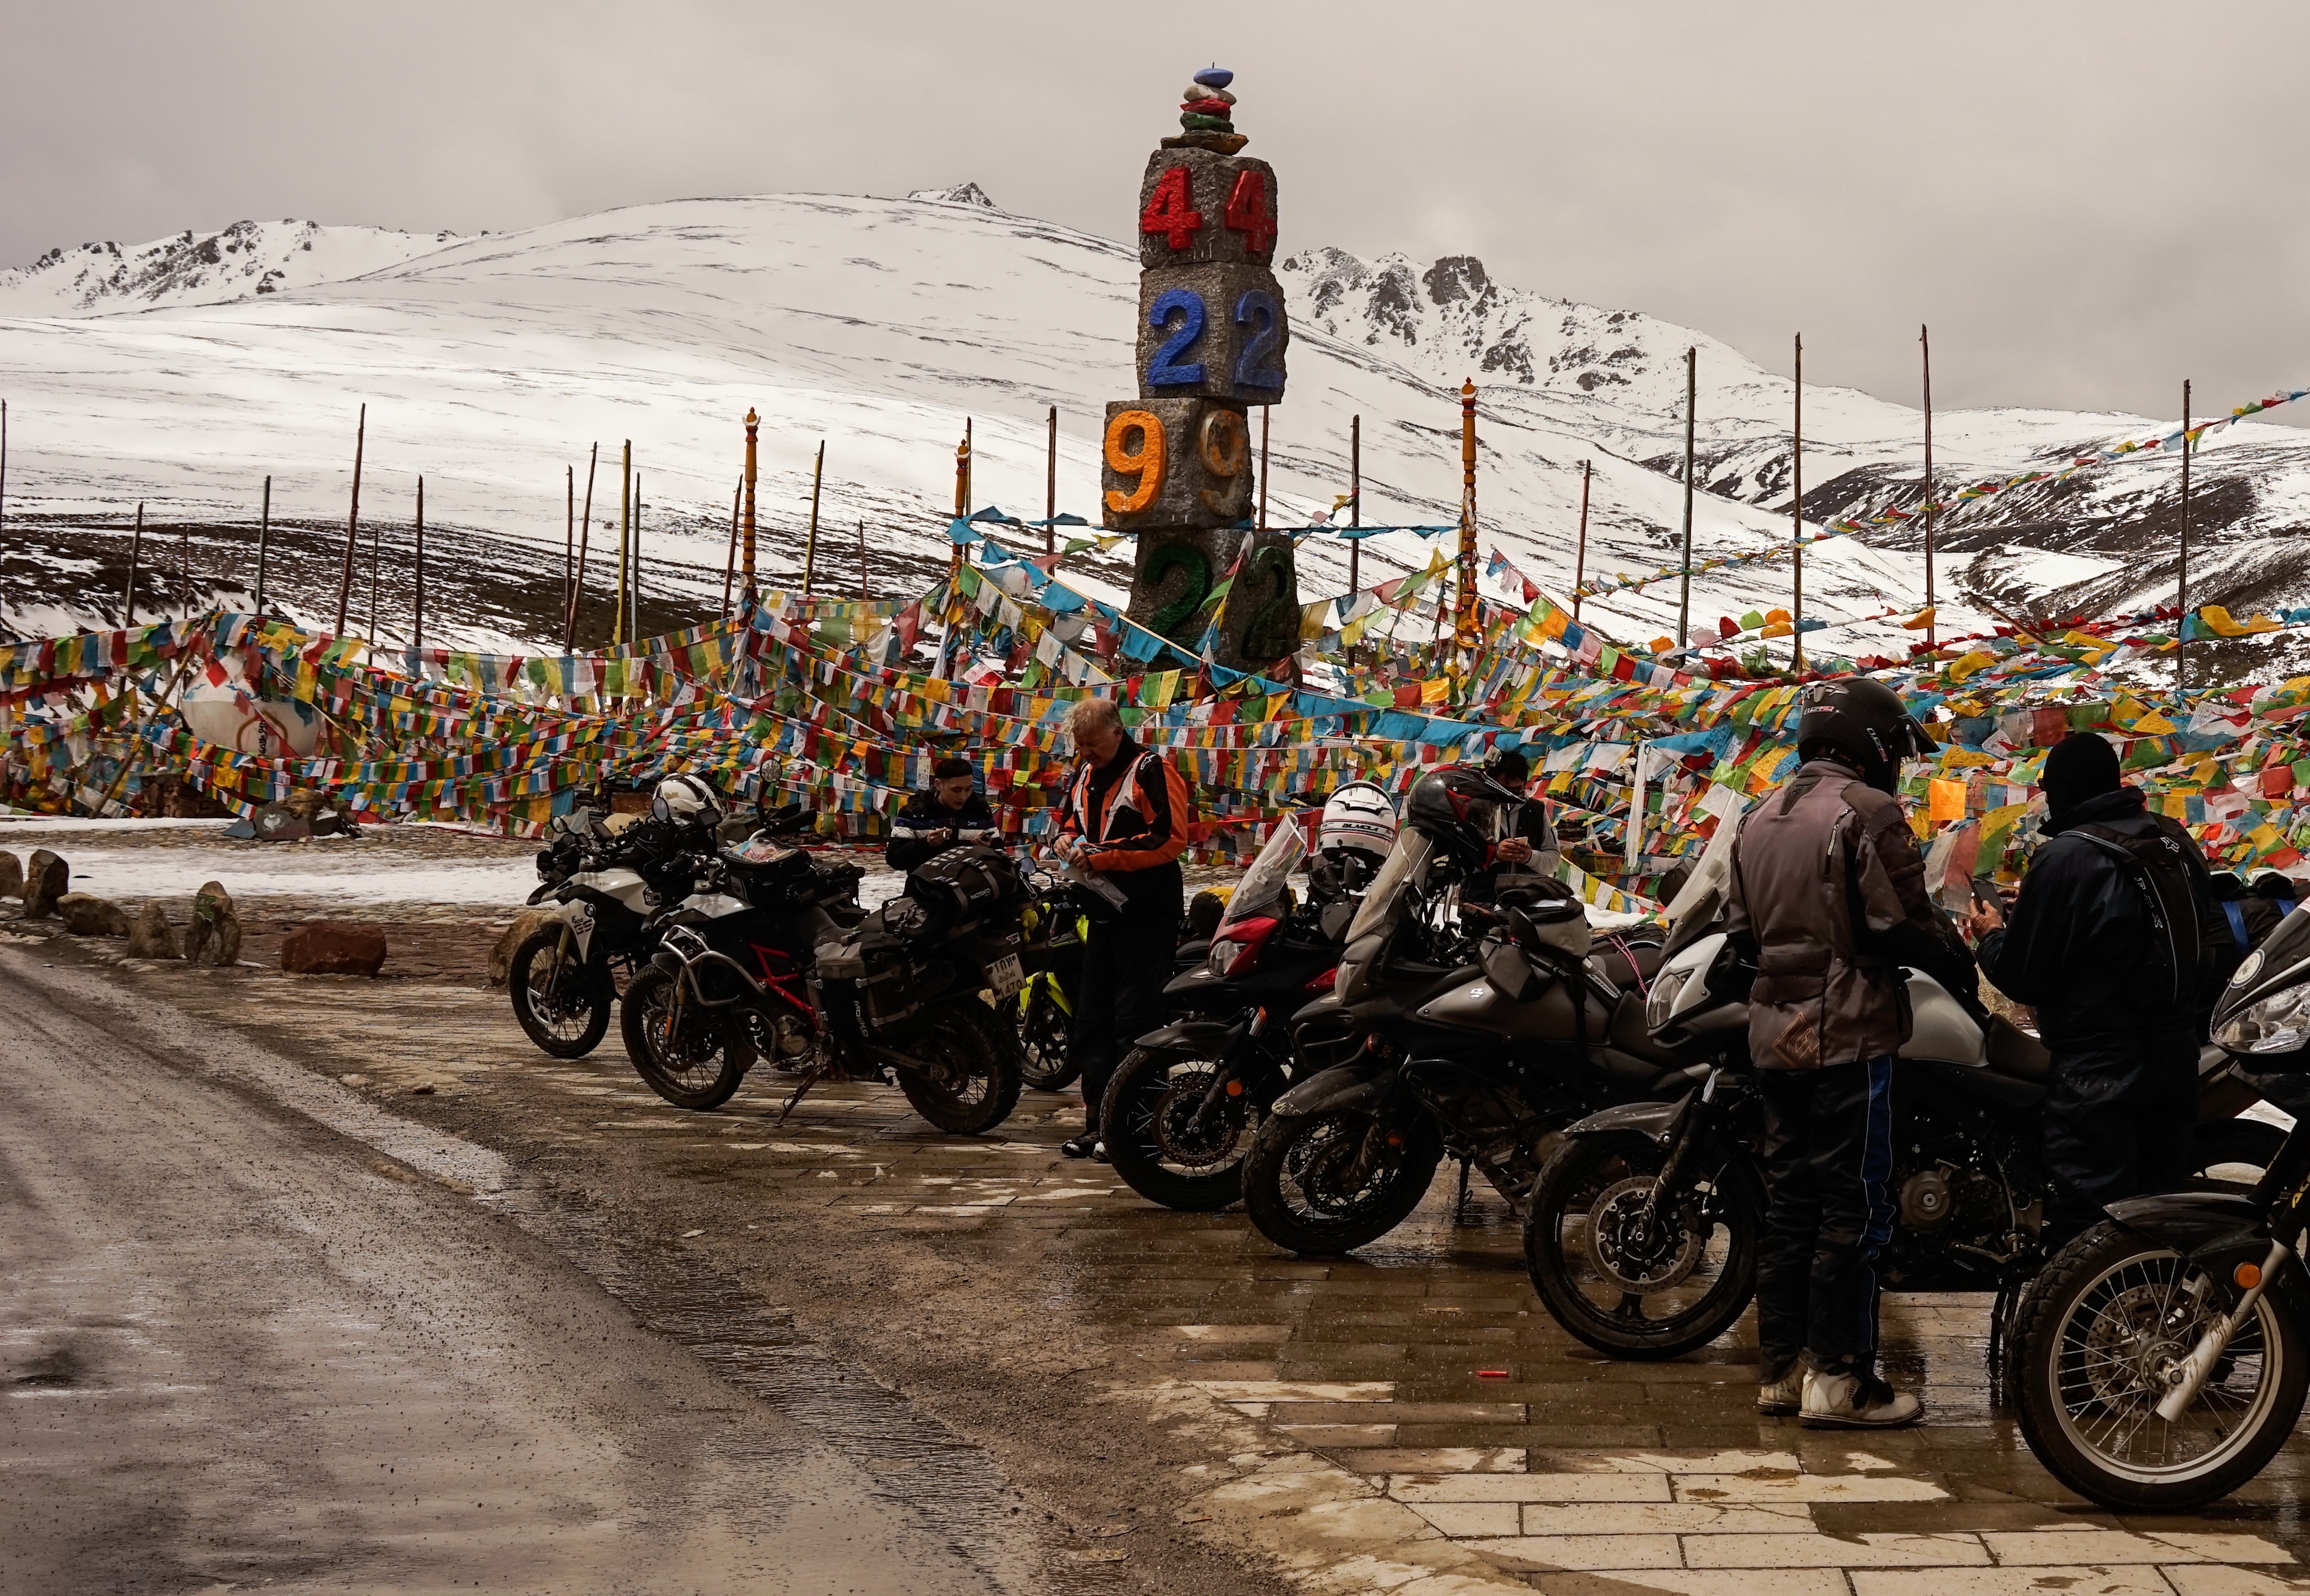 Mountain passes on a motorcycle tour give some of the best photo opportunities for photo of the bike you are riding